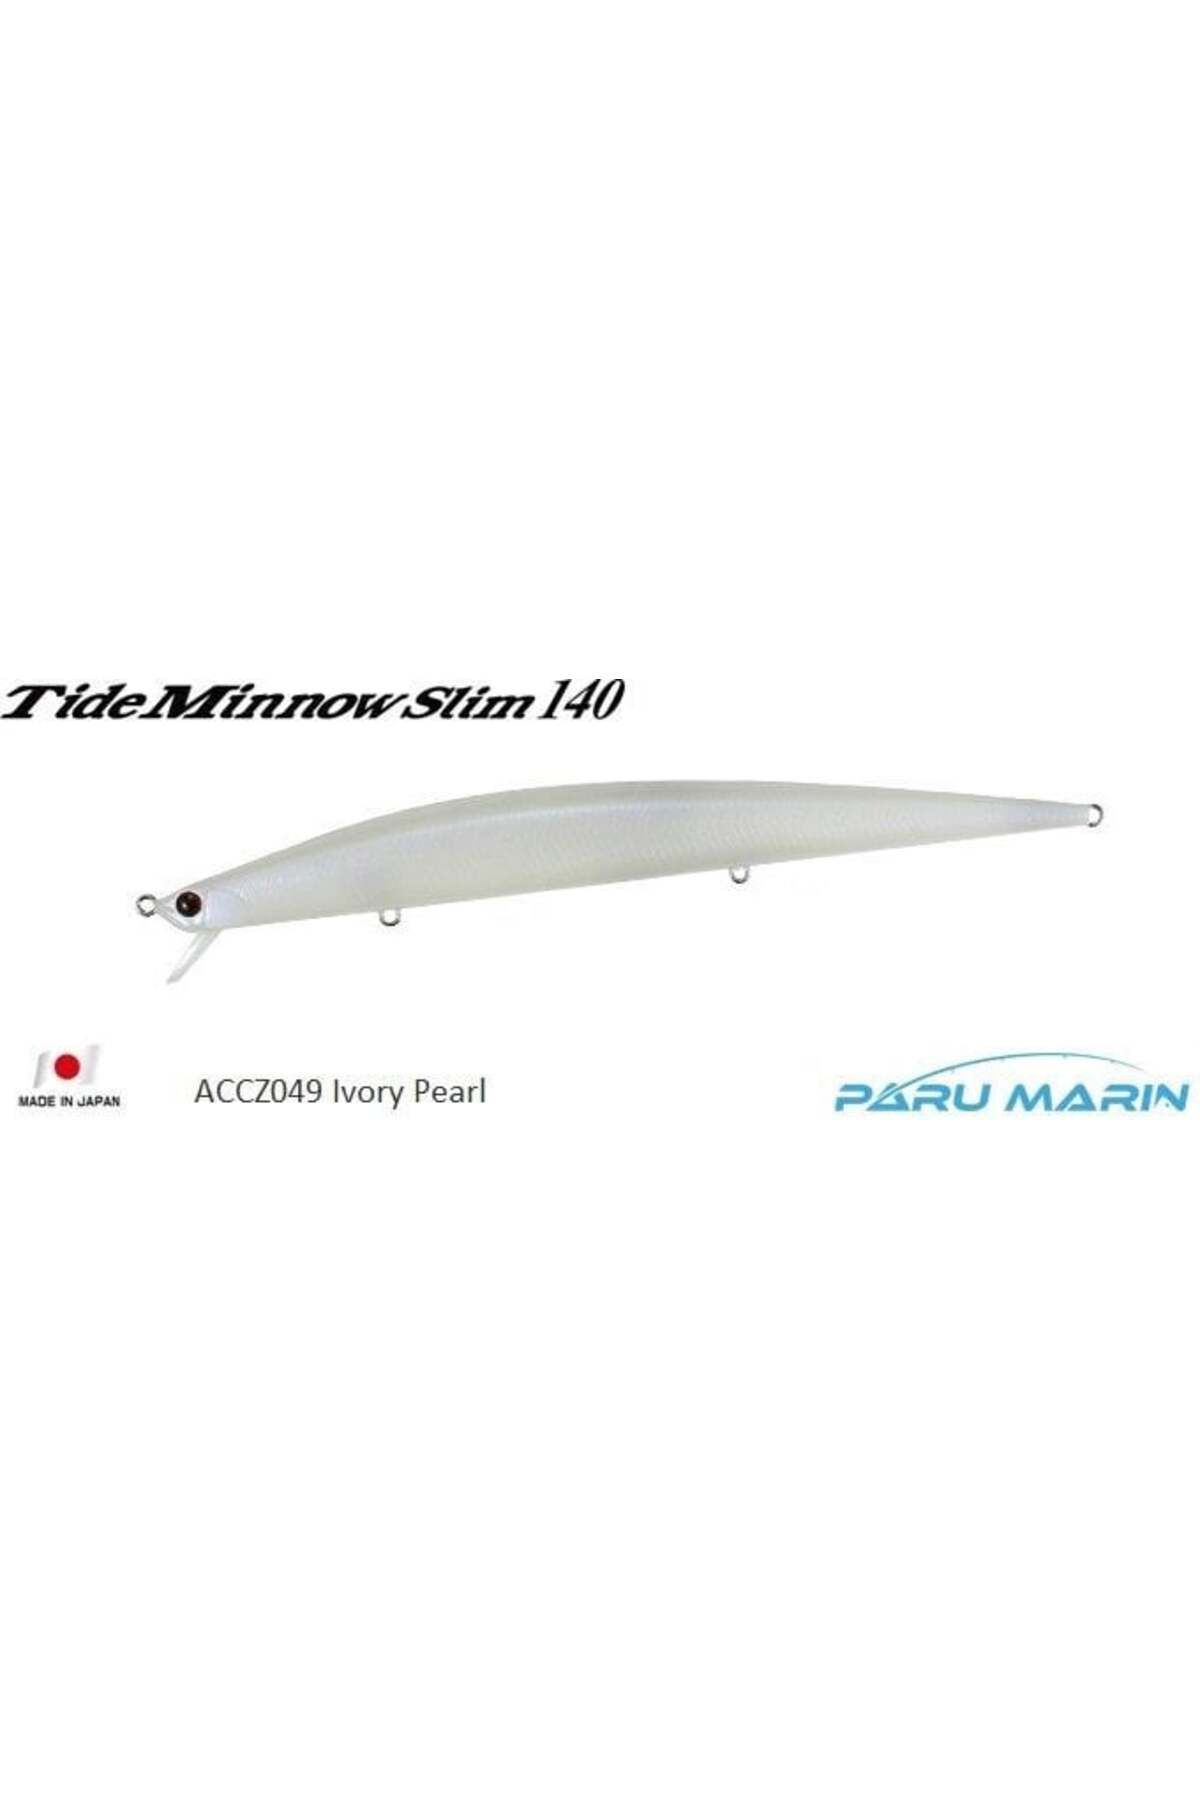 Duo Tide Minnow Slim 140 ACCZ049 Ivory Pearl